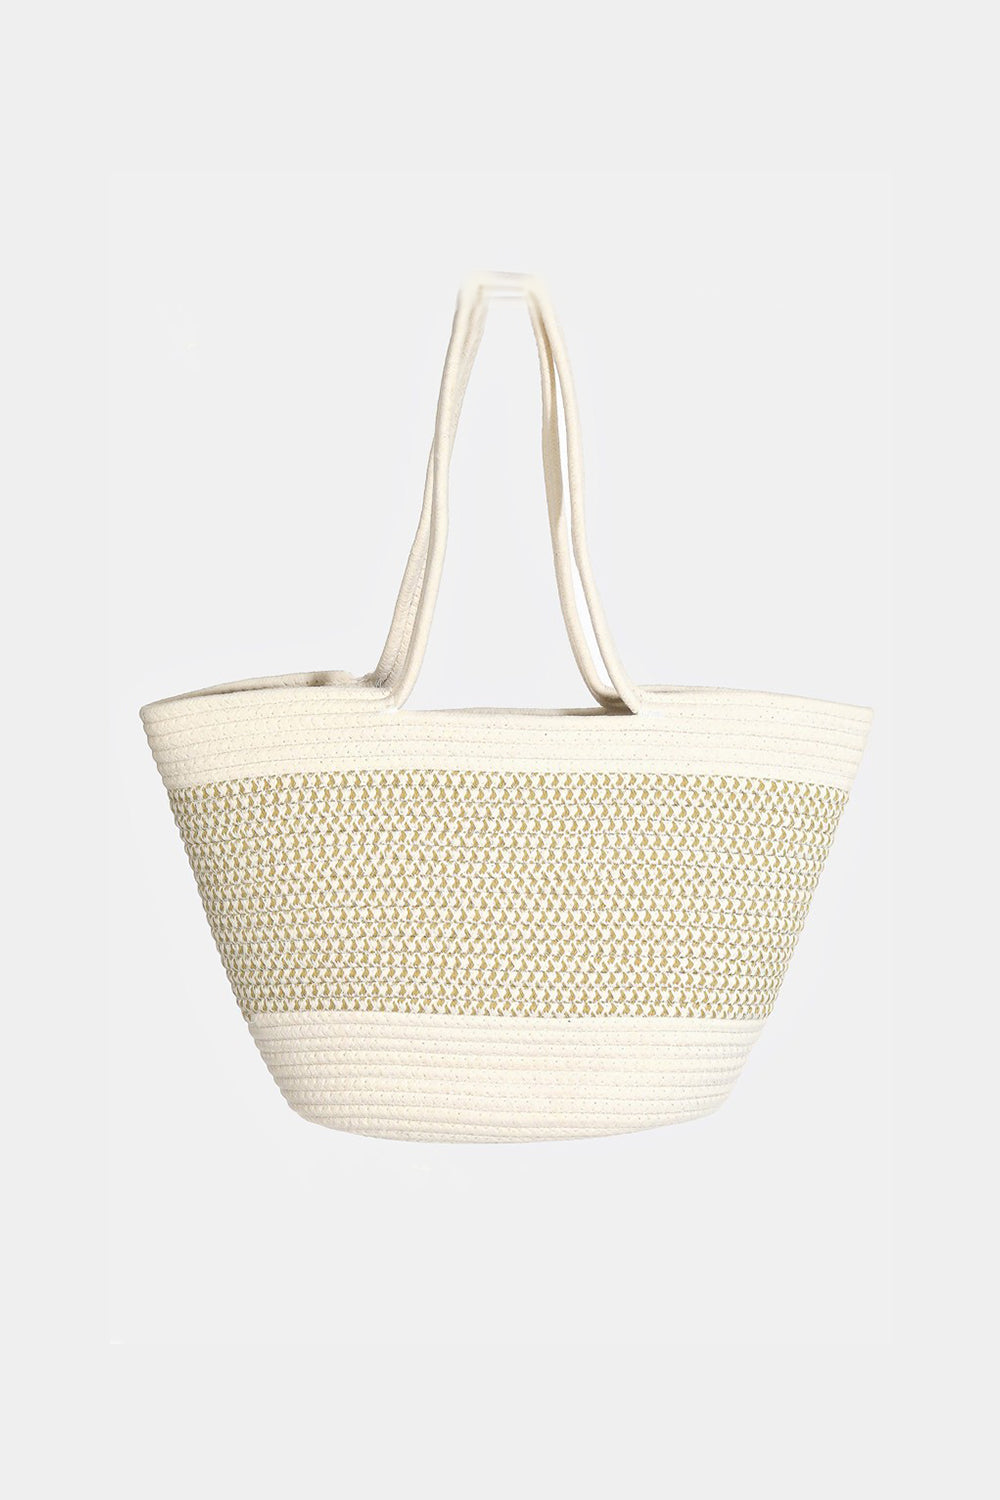 Fame Braid Pattern Beach Tote Bag Ivory One Size 